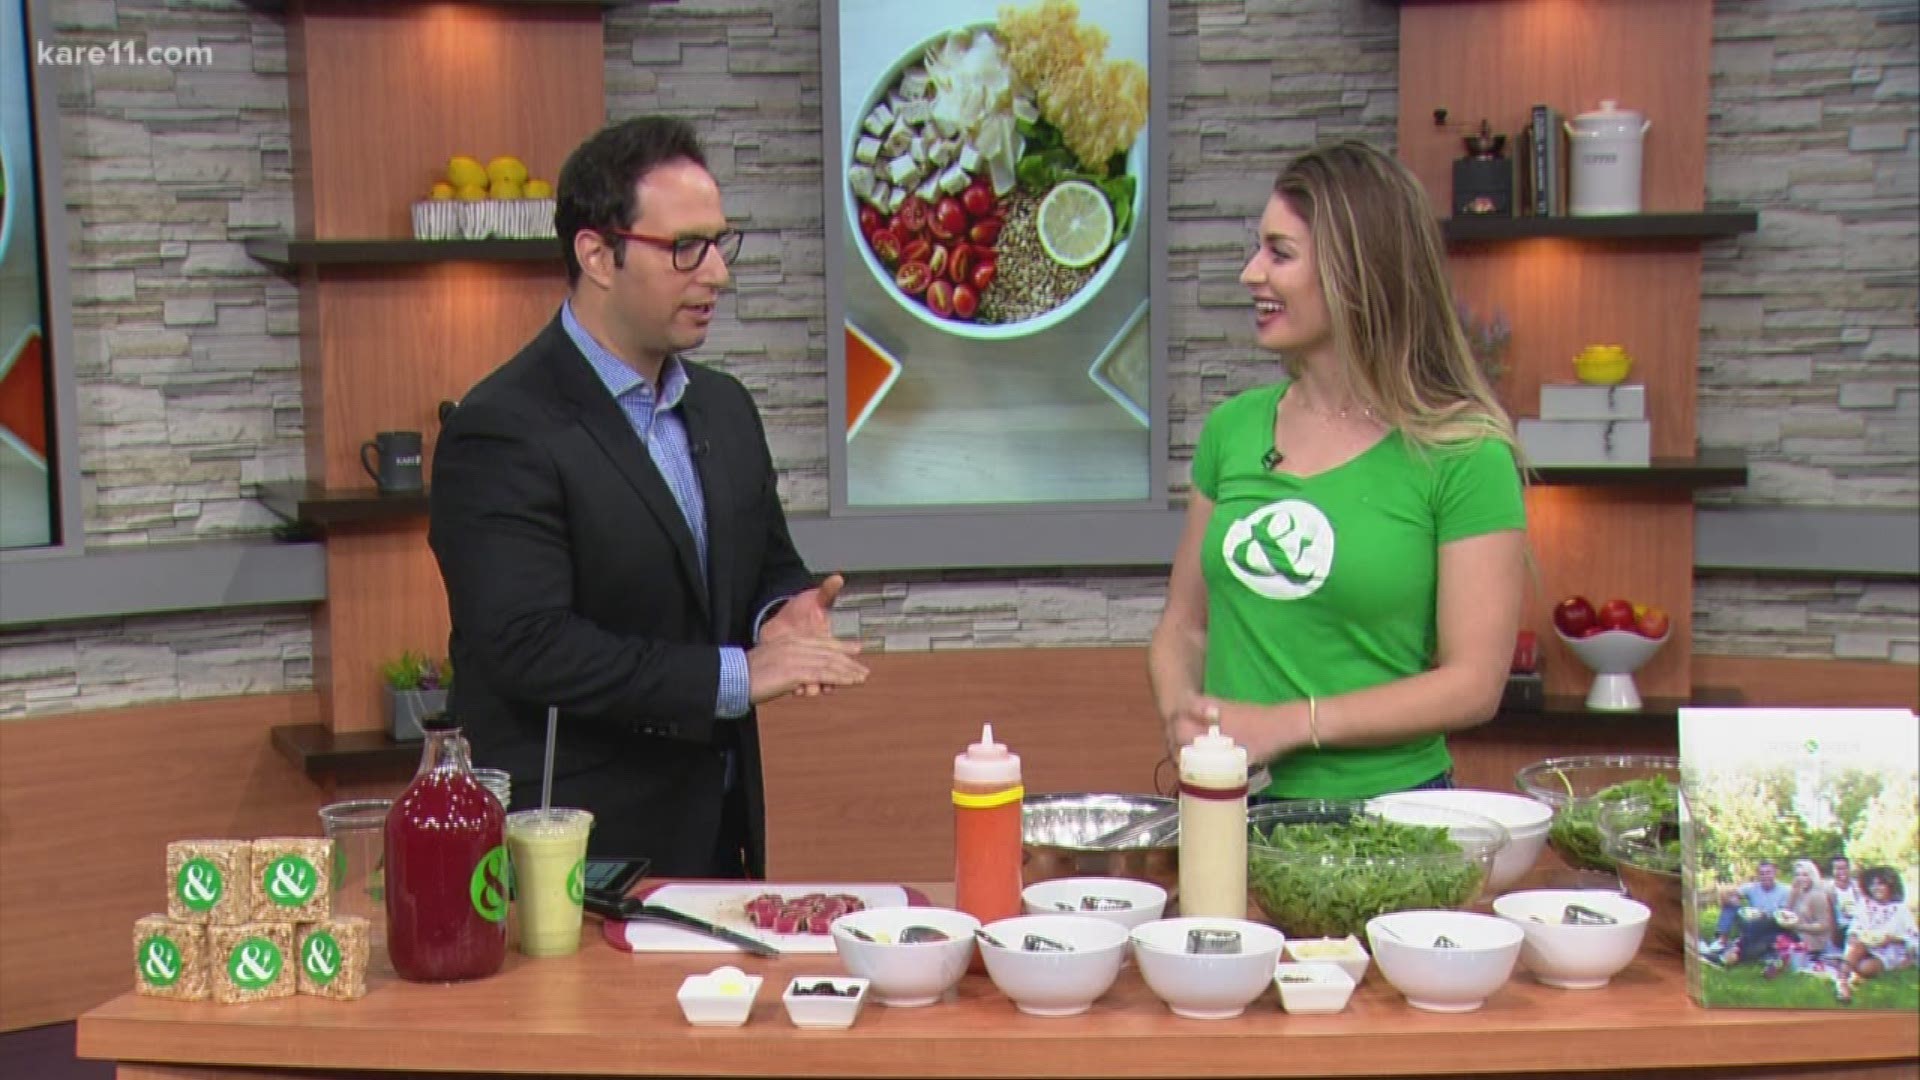 Crisp and Green has been serving up fresh salads in Wayzata for almost 2 years. Now, they have a new location in Edina. Founding partner Lily Smith joined KARE 11 Saturday to help put together a fall salad.